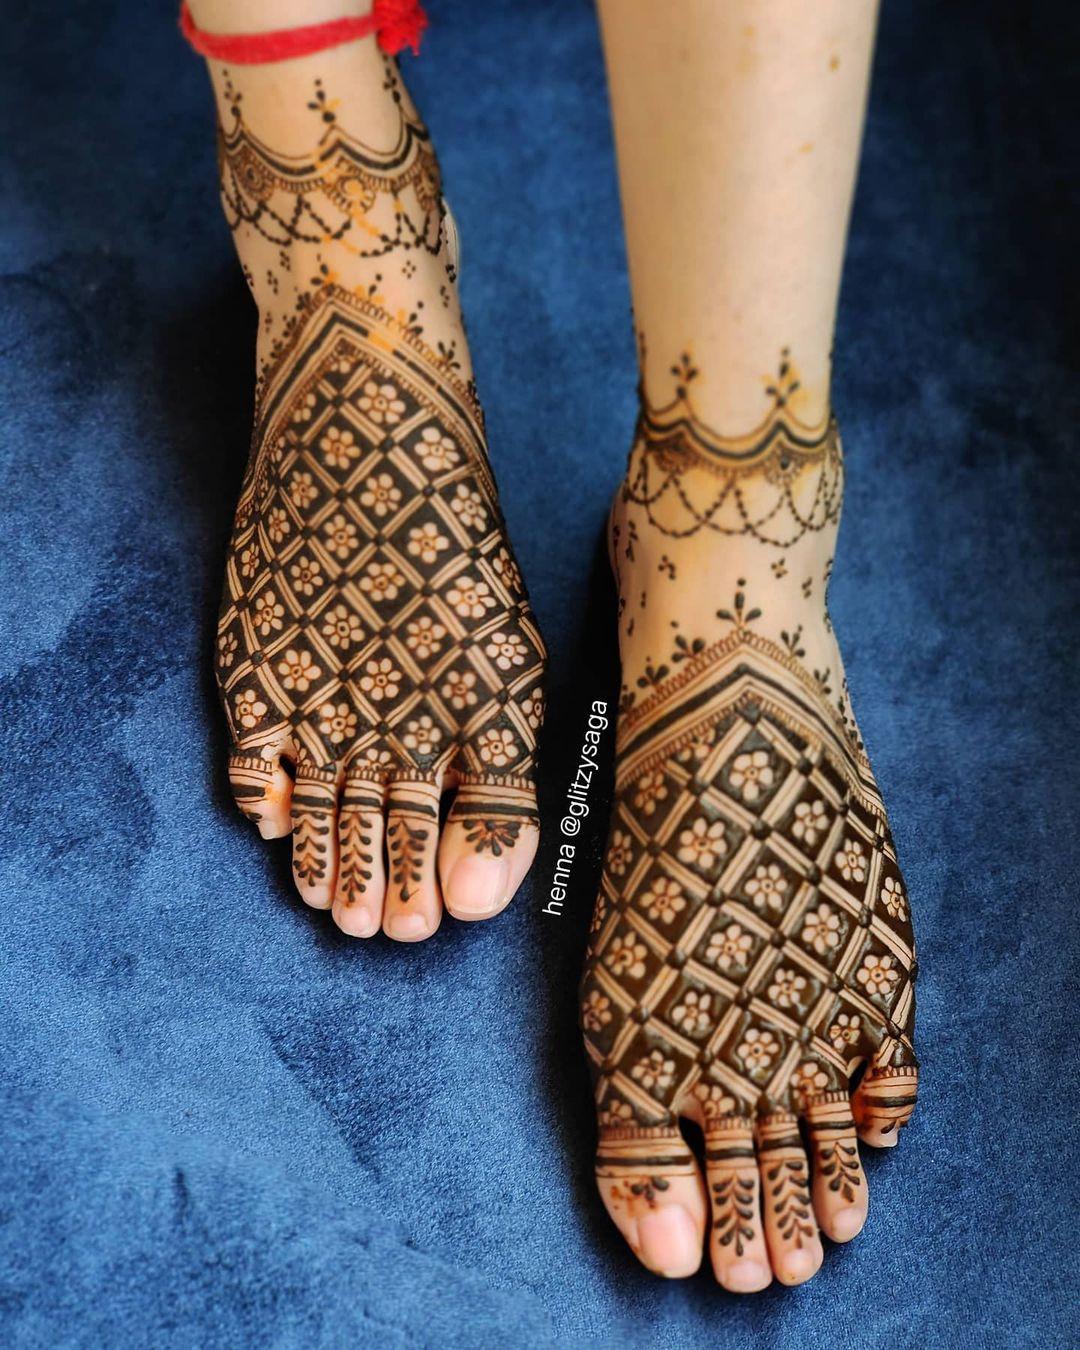 how to do Henna Tattoo on Ankle - YouTube